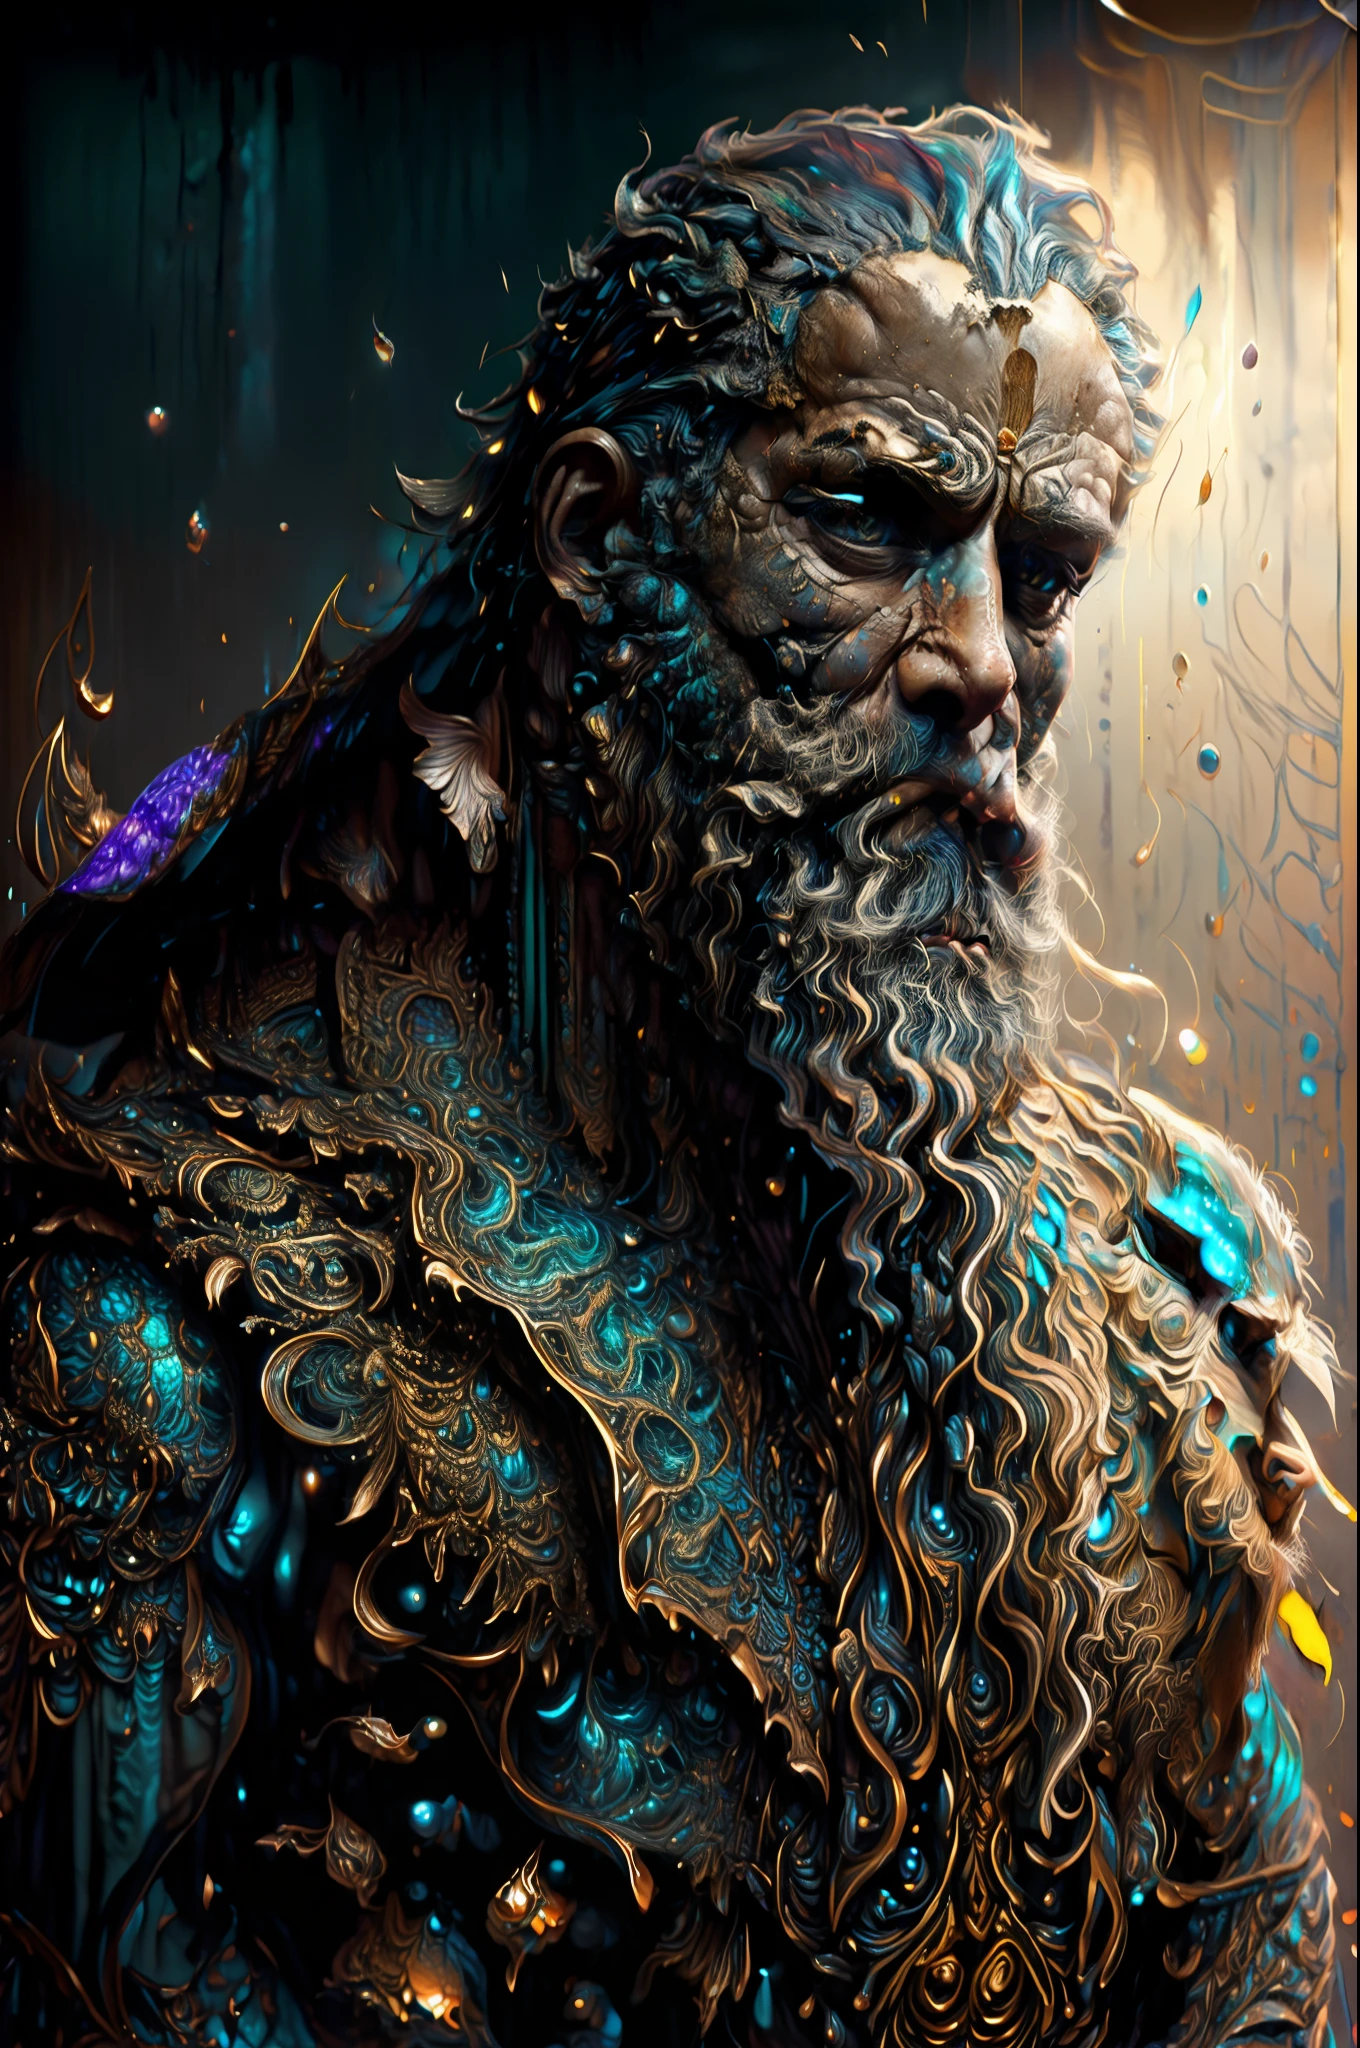 Digital painting of a man with a beard and a flowered headdress ,Art by Alberto Severo, multicolored frozen splashes and drops, dream, Surreal digital painting , iridescent glitter, 3D effects, ultra hd, masterful work of art ,cinematic lighting,16k Highly detailed 4K digital art, Intricate digital painting, Detailed 4K digital art, Great digital art with details, amazing detail digital art, Extremely detailed digital art, Highly detailed digital art, amazing digital art, Awesome Digital Illustration, hyperdetailed fantasy character, Hyper-detailed digital art, Overly detailed digital art